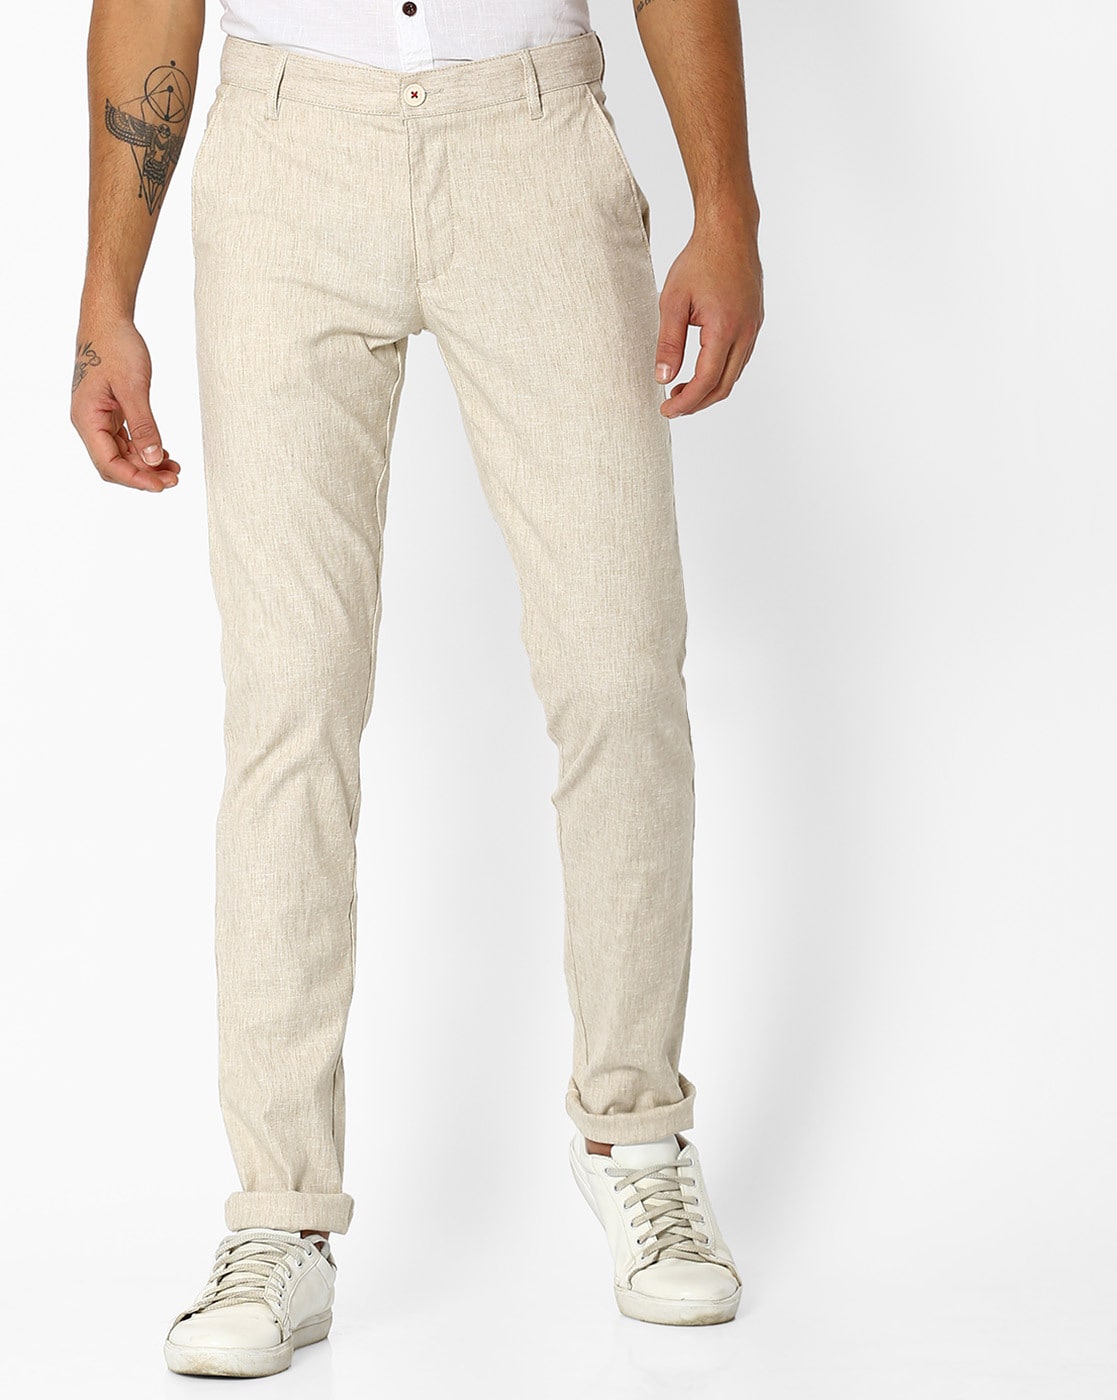 Buy Cream Trousers  Pants for Men by COOL COLORS Online  Ajiocom